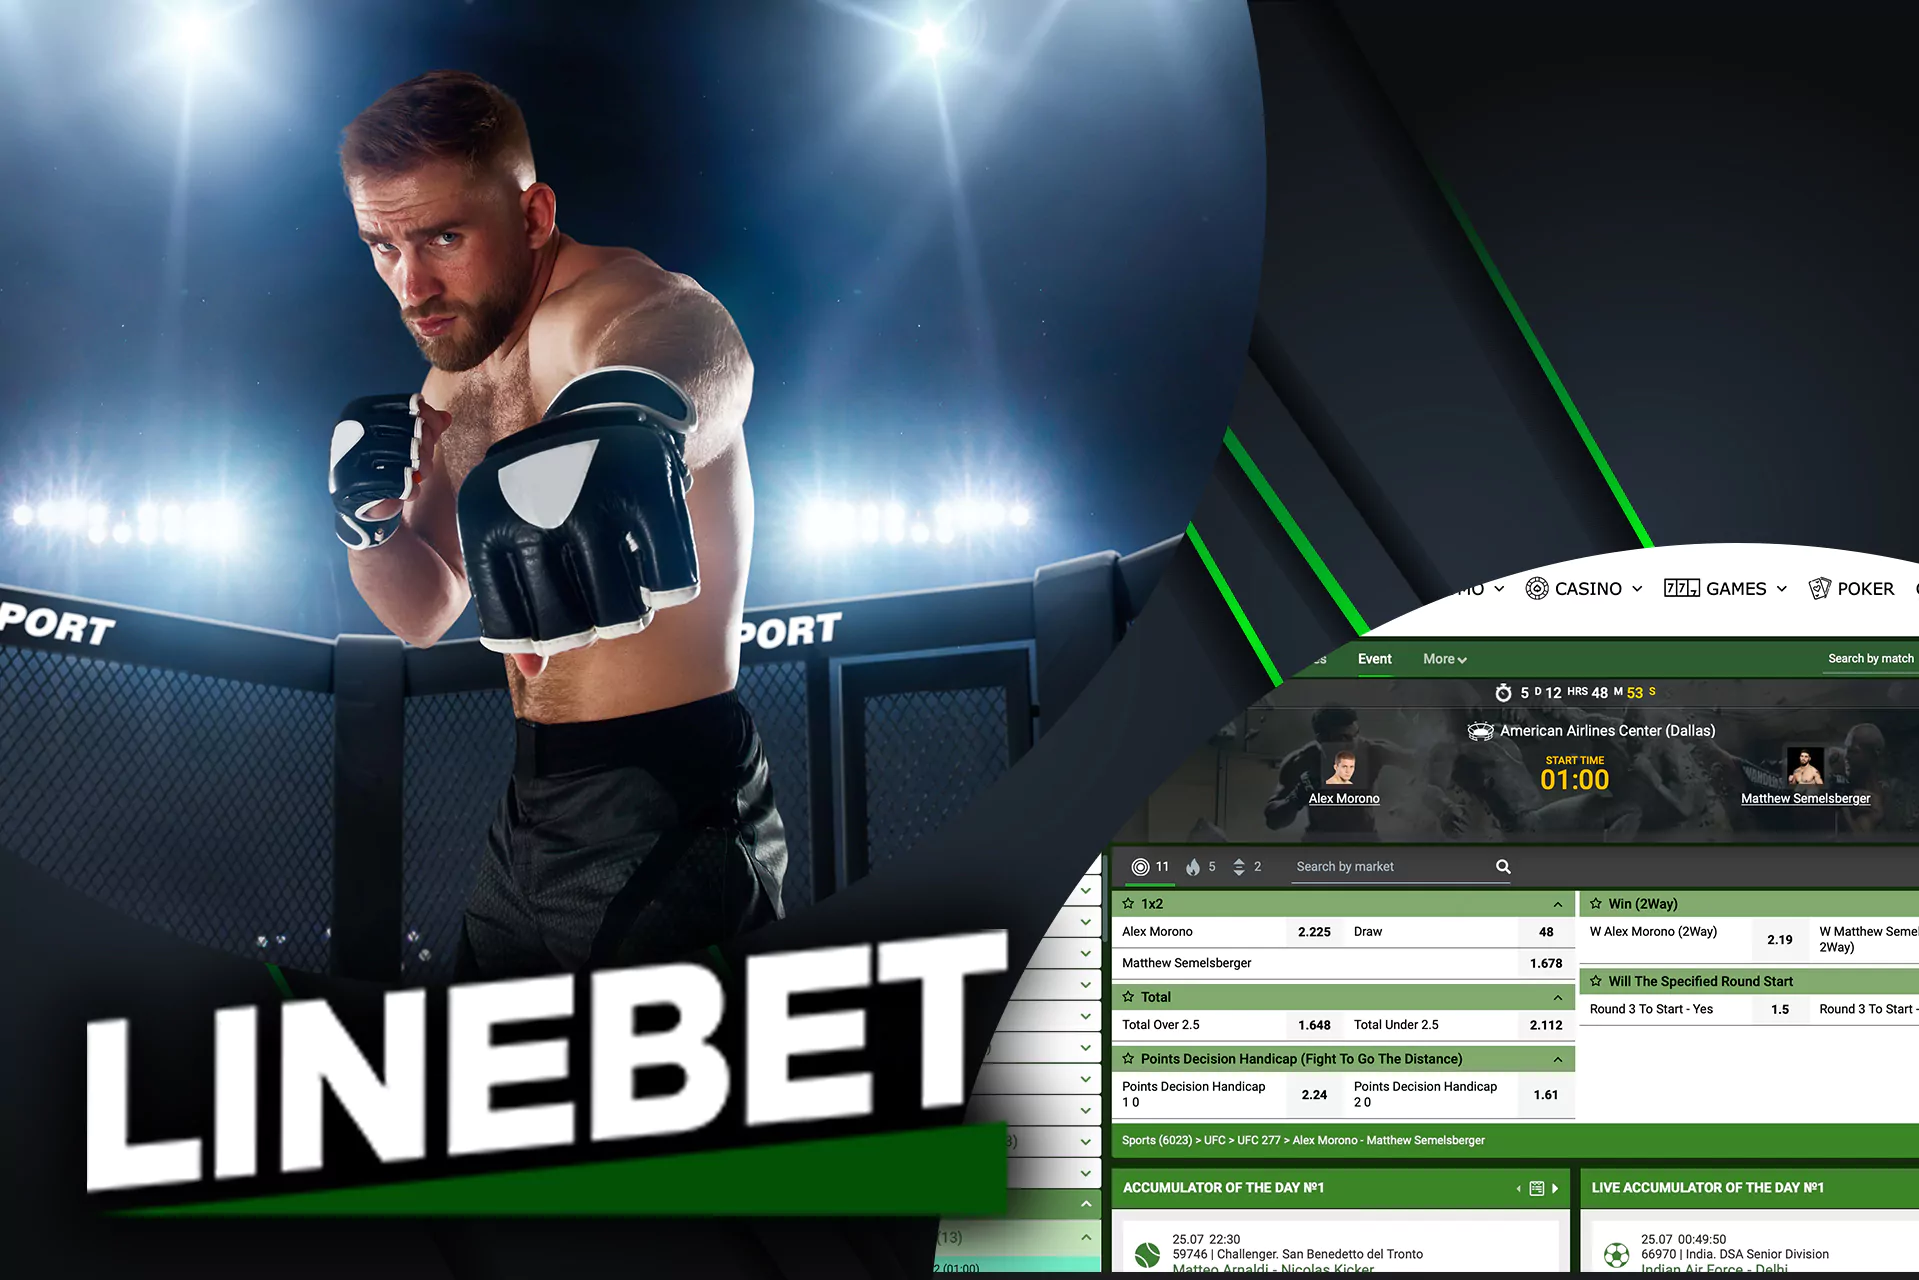 YOu can bet on UFC fighters in the Linebet sportsbook.